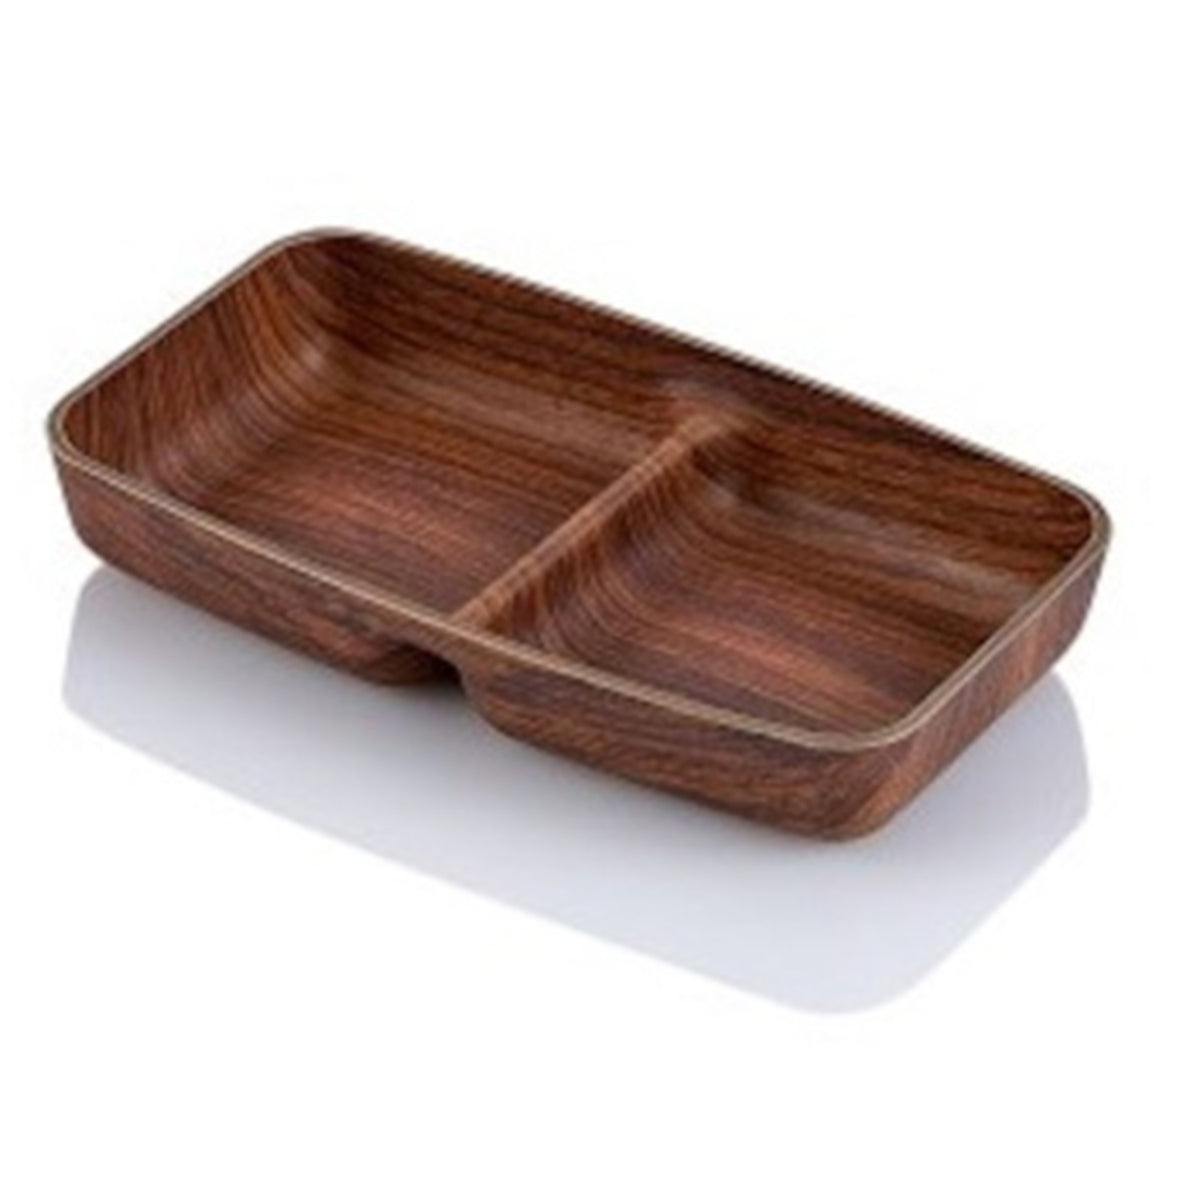 Sauce and Snack Dish - 2 Compartments